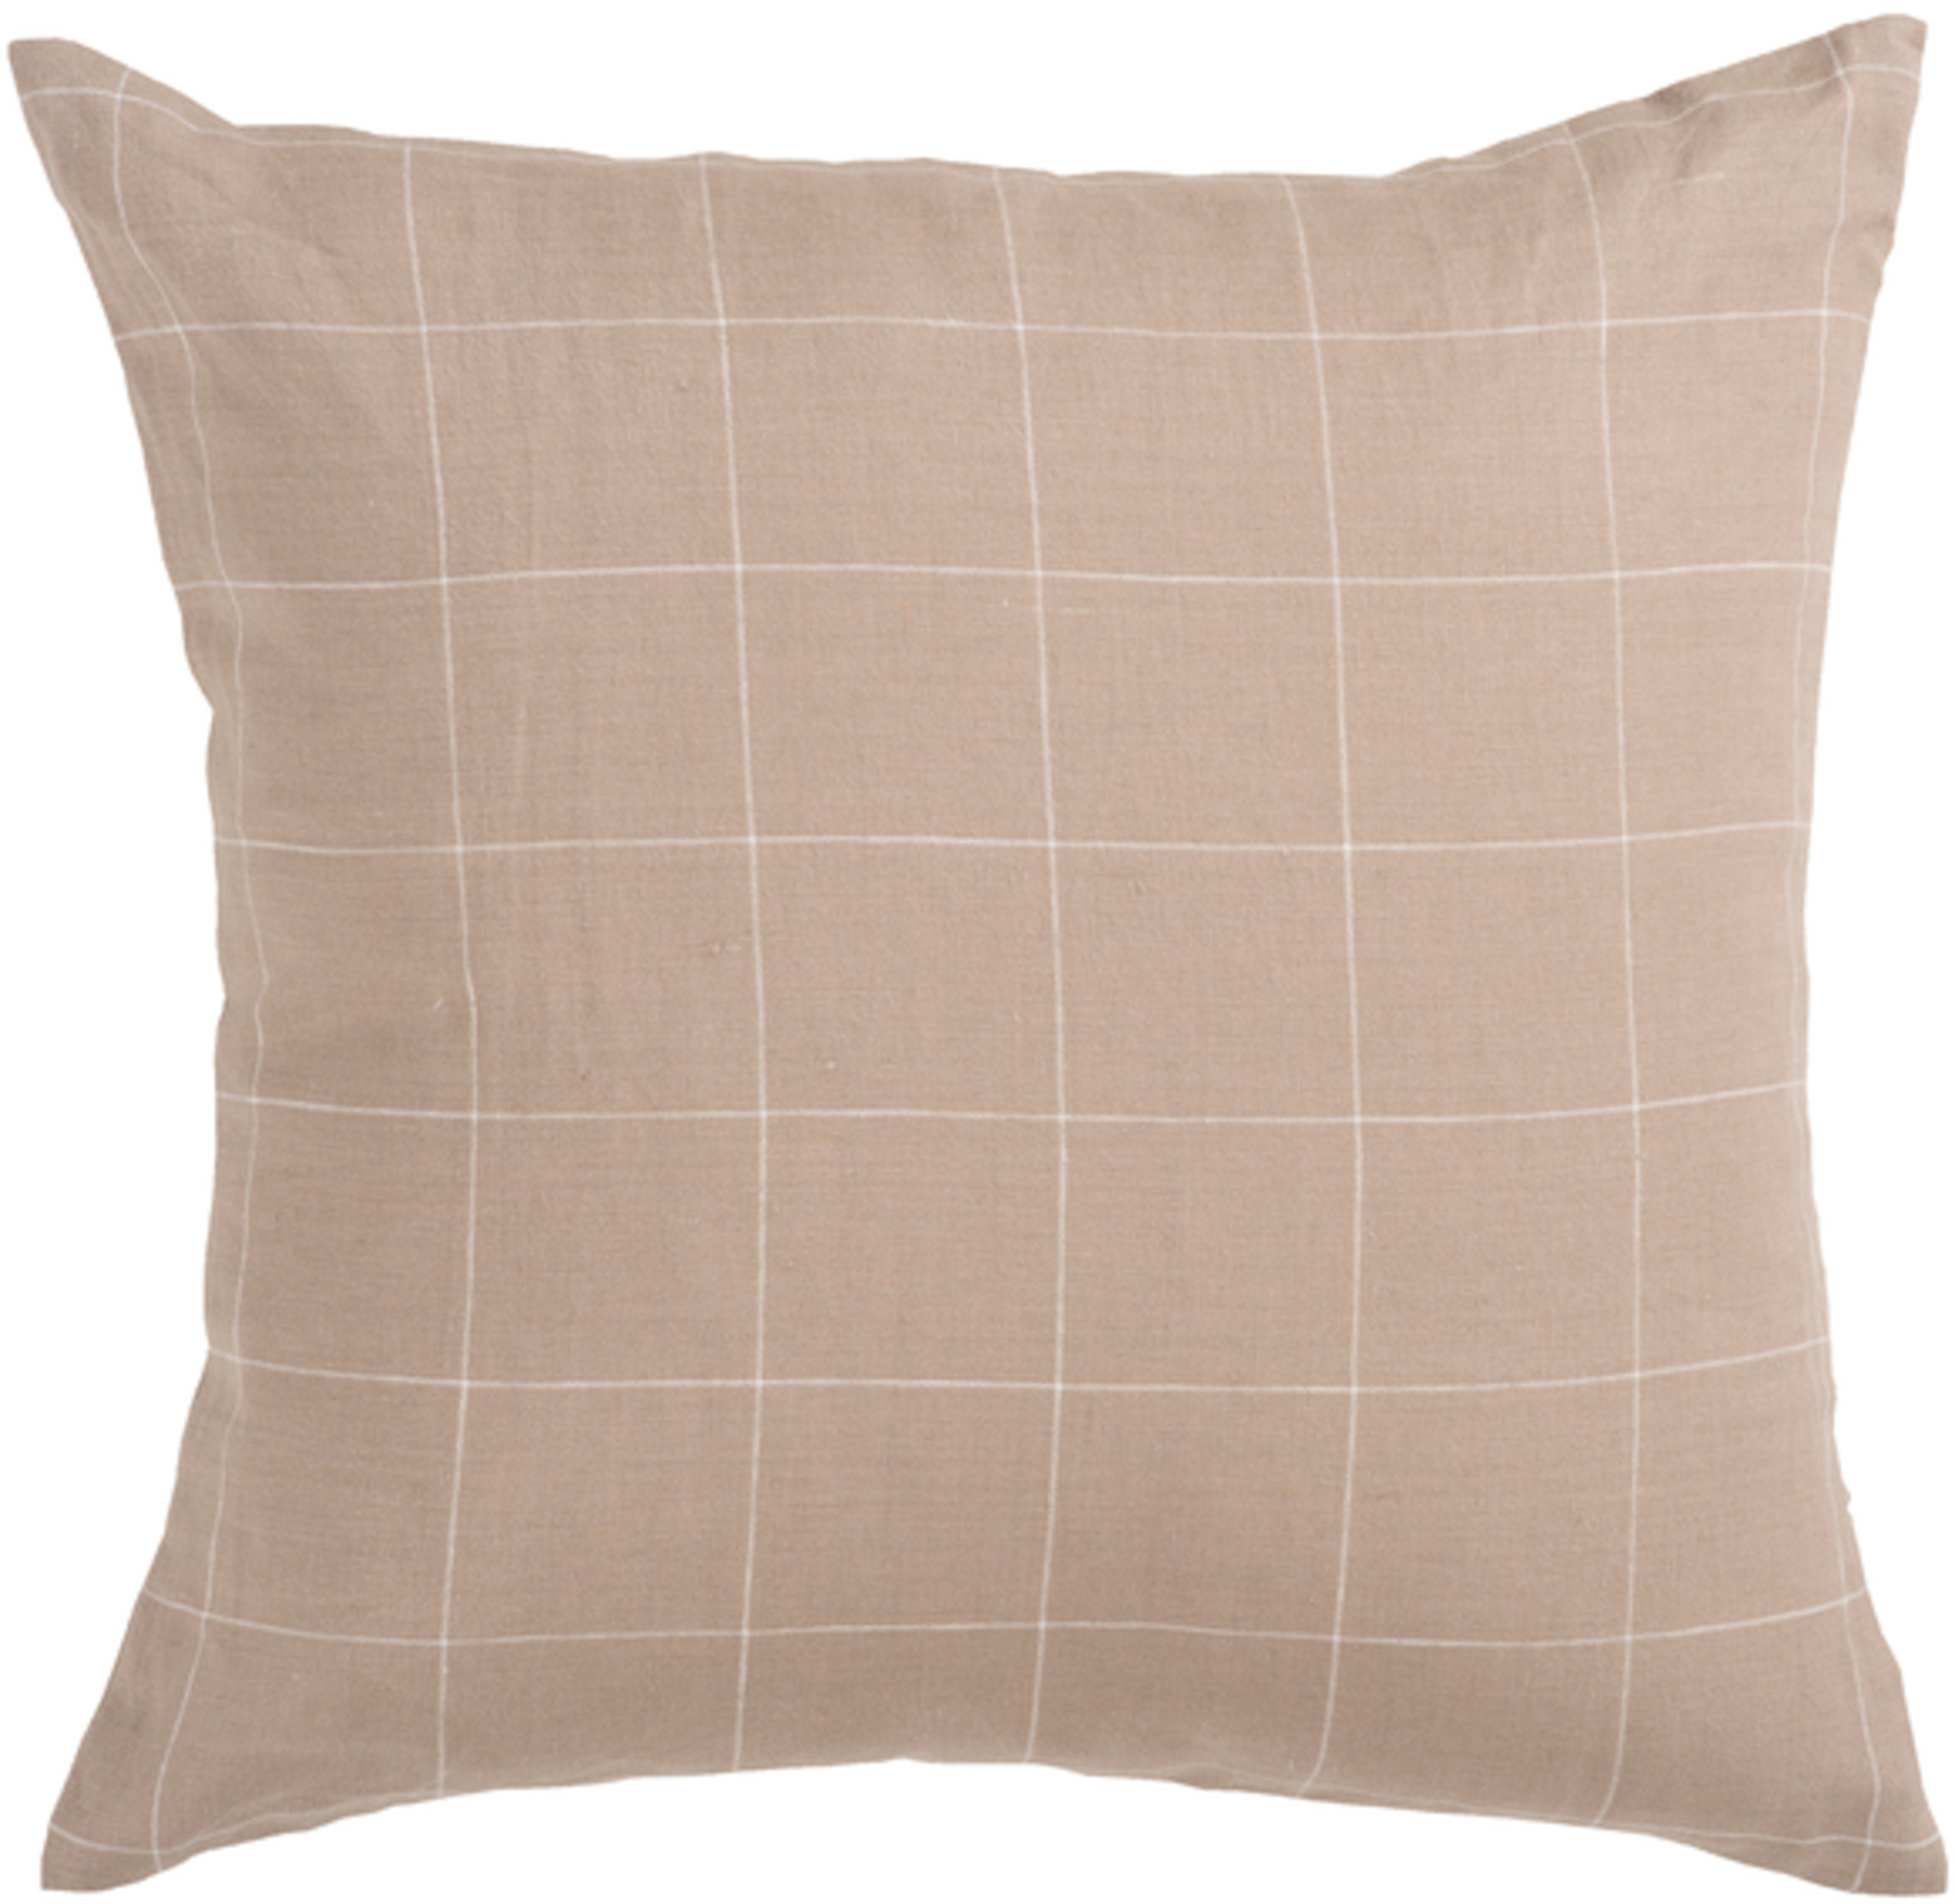 Decorative Pillows - JS-014 - 22" x 22" - with poly insert - Surya